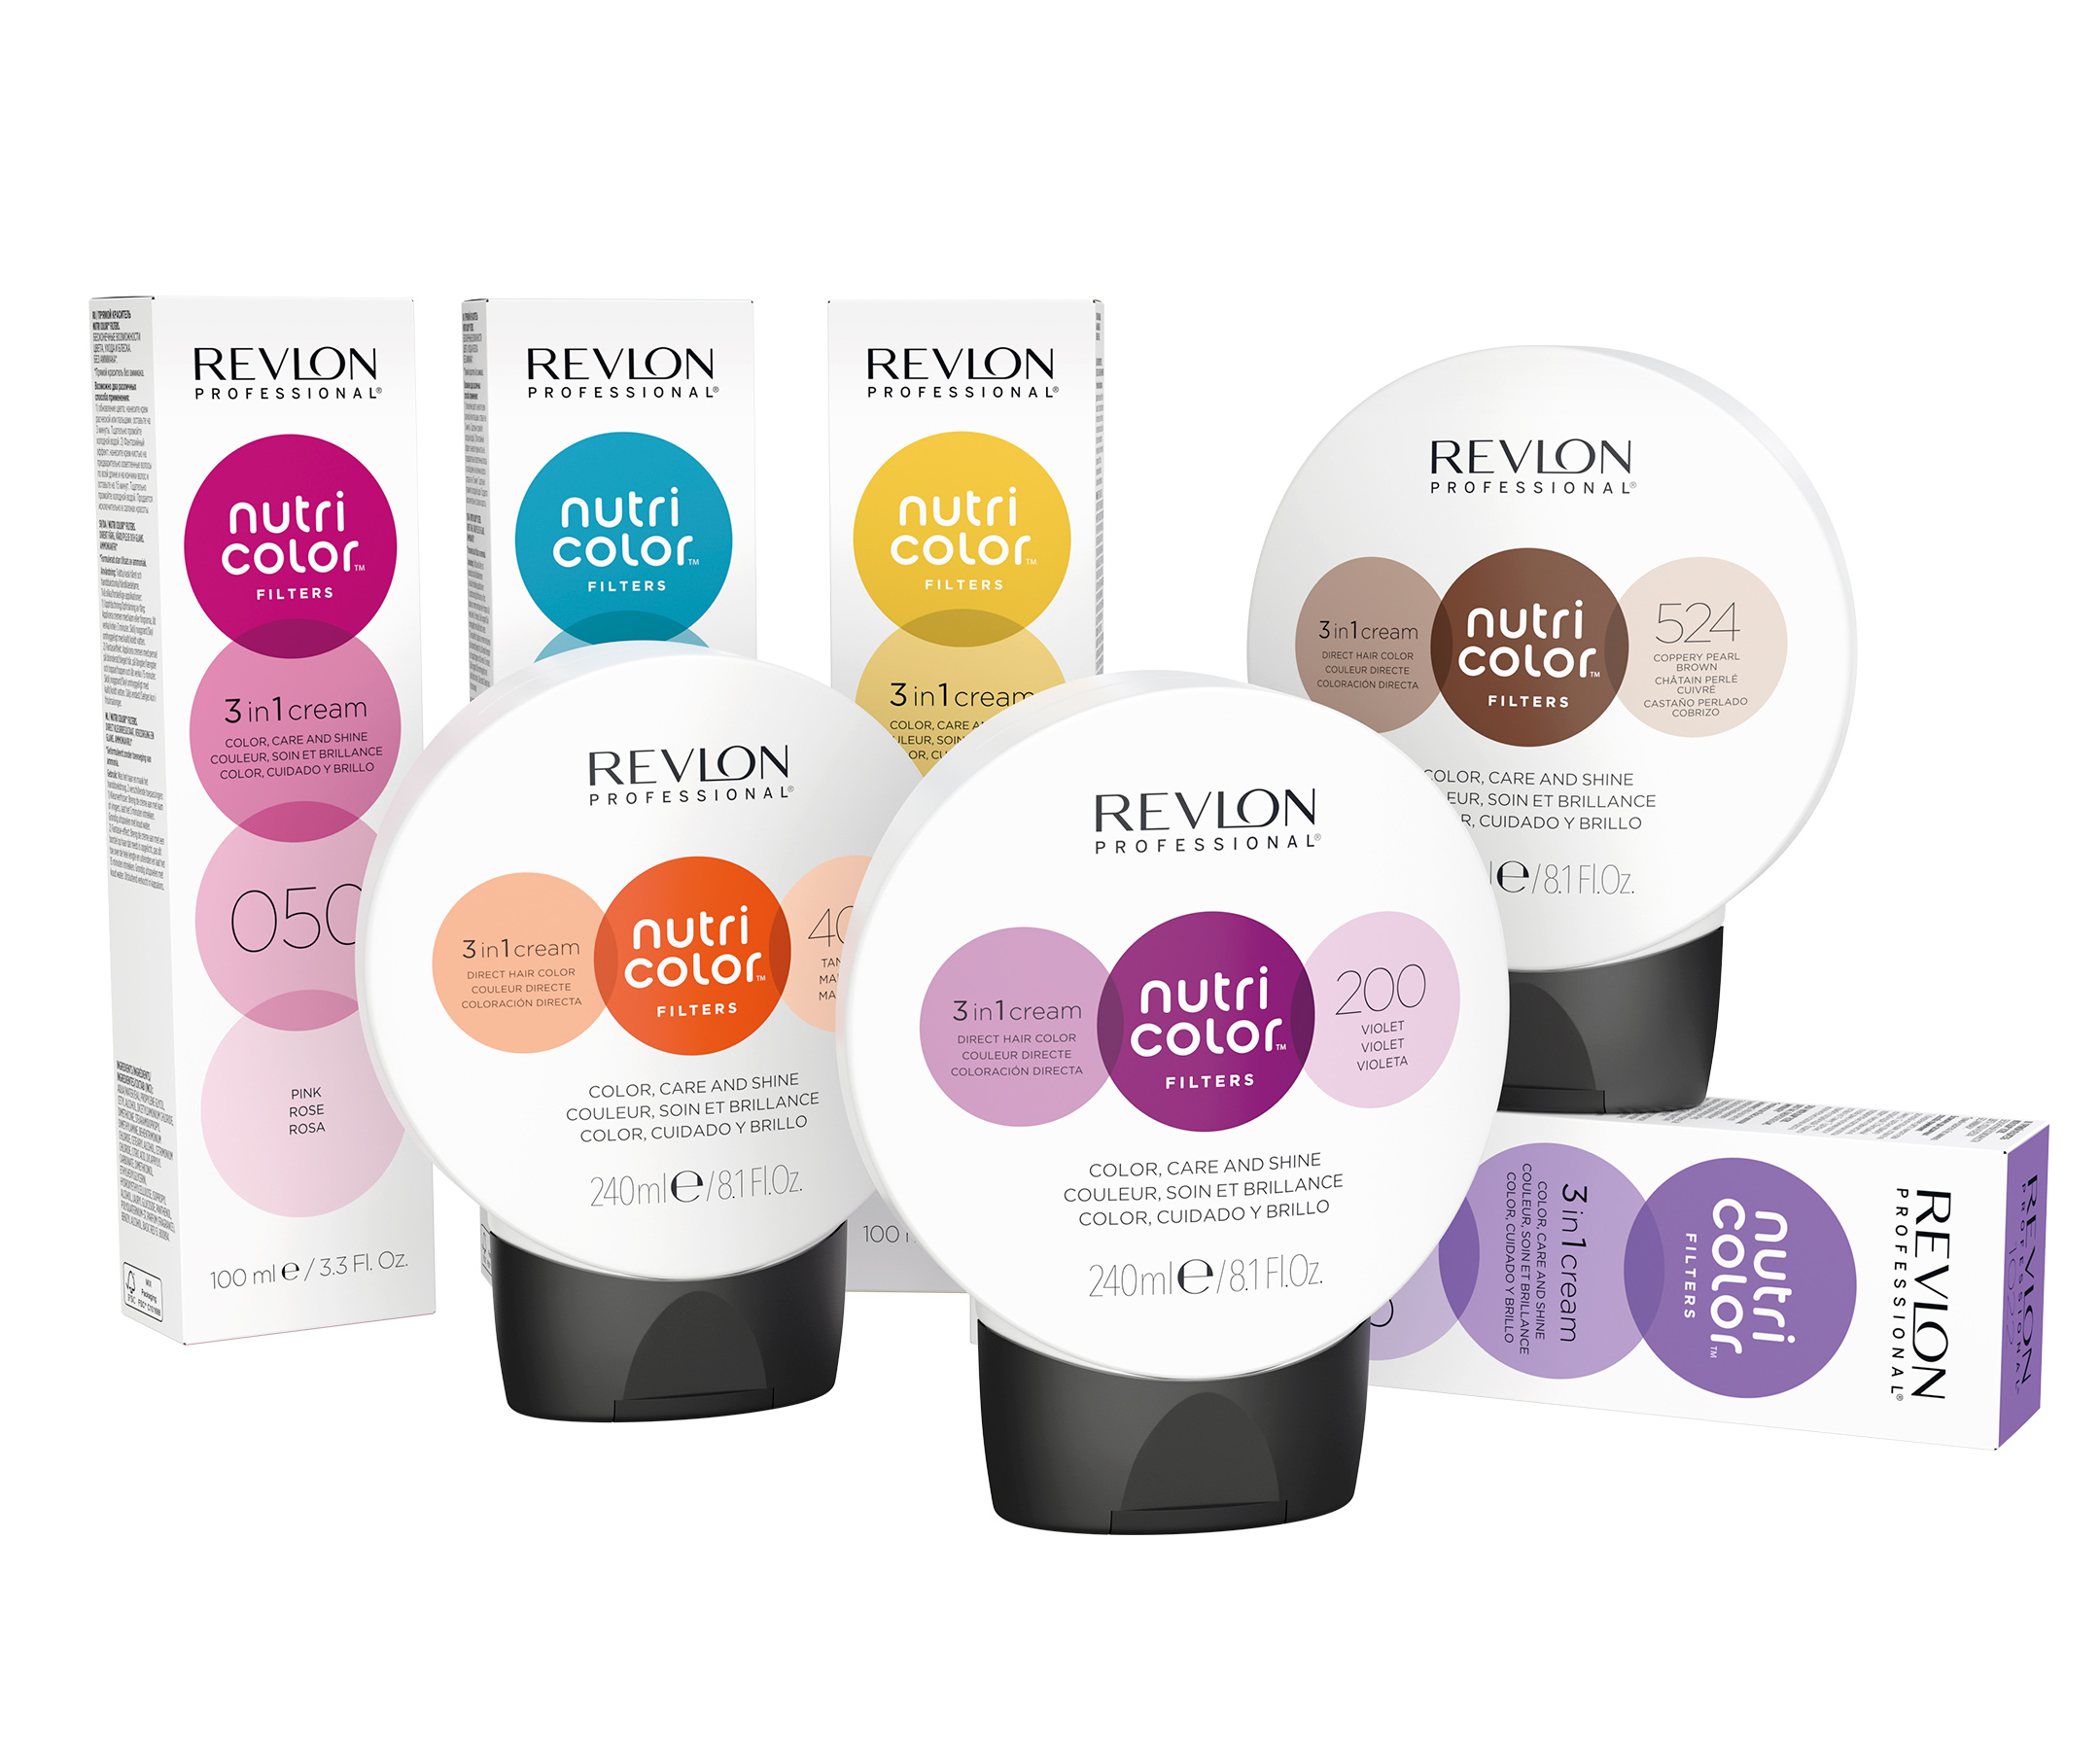 Nutri Color Filters from Revlon